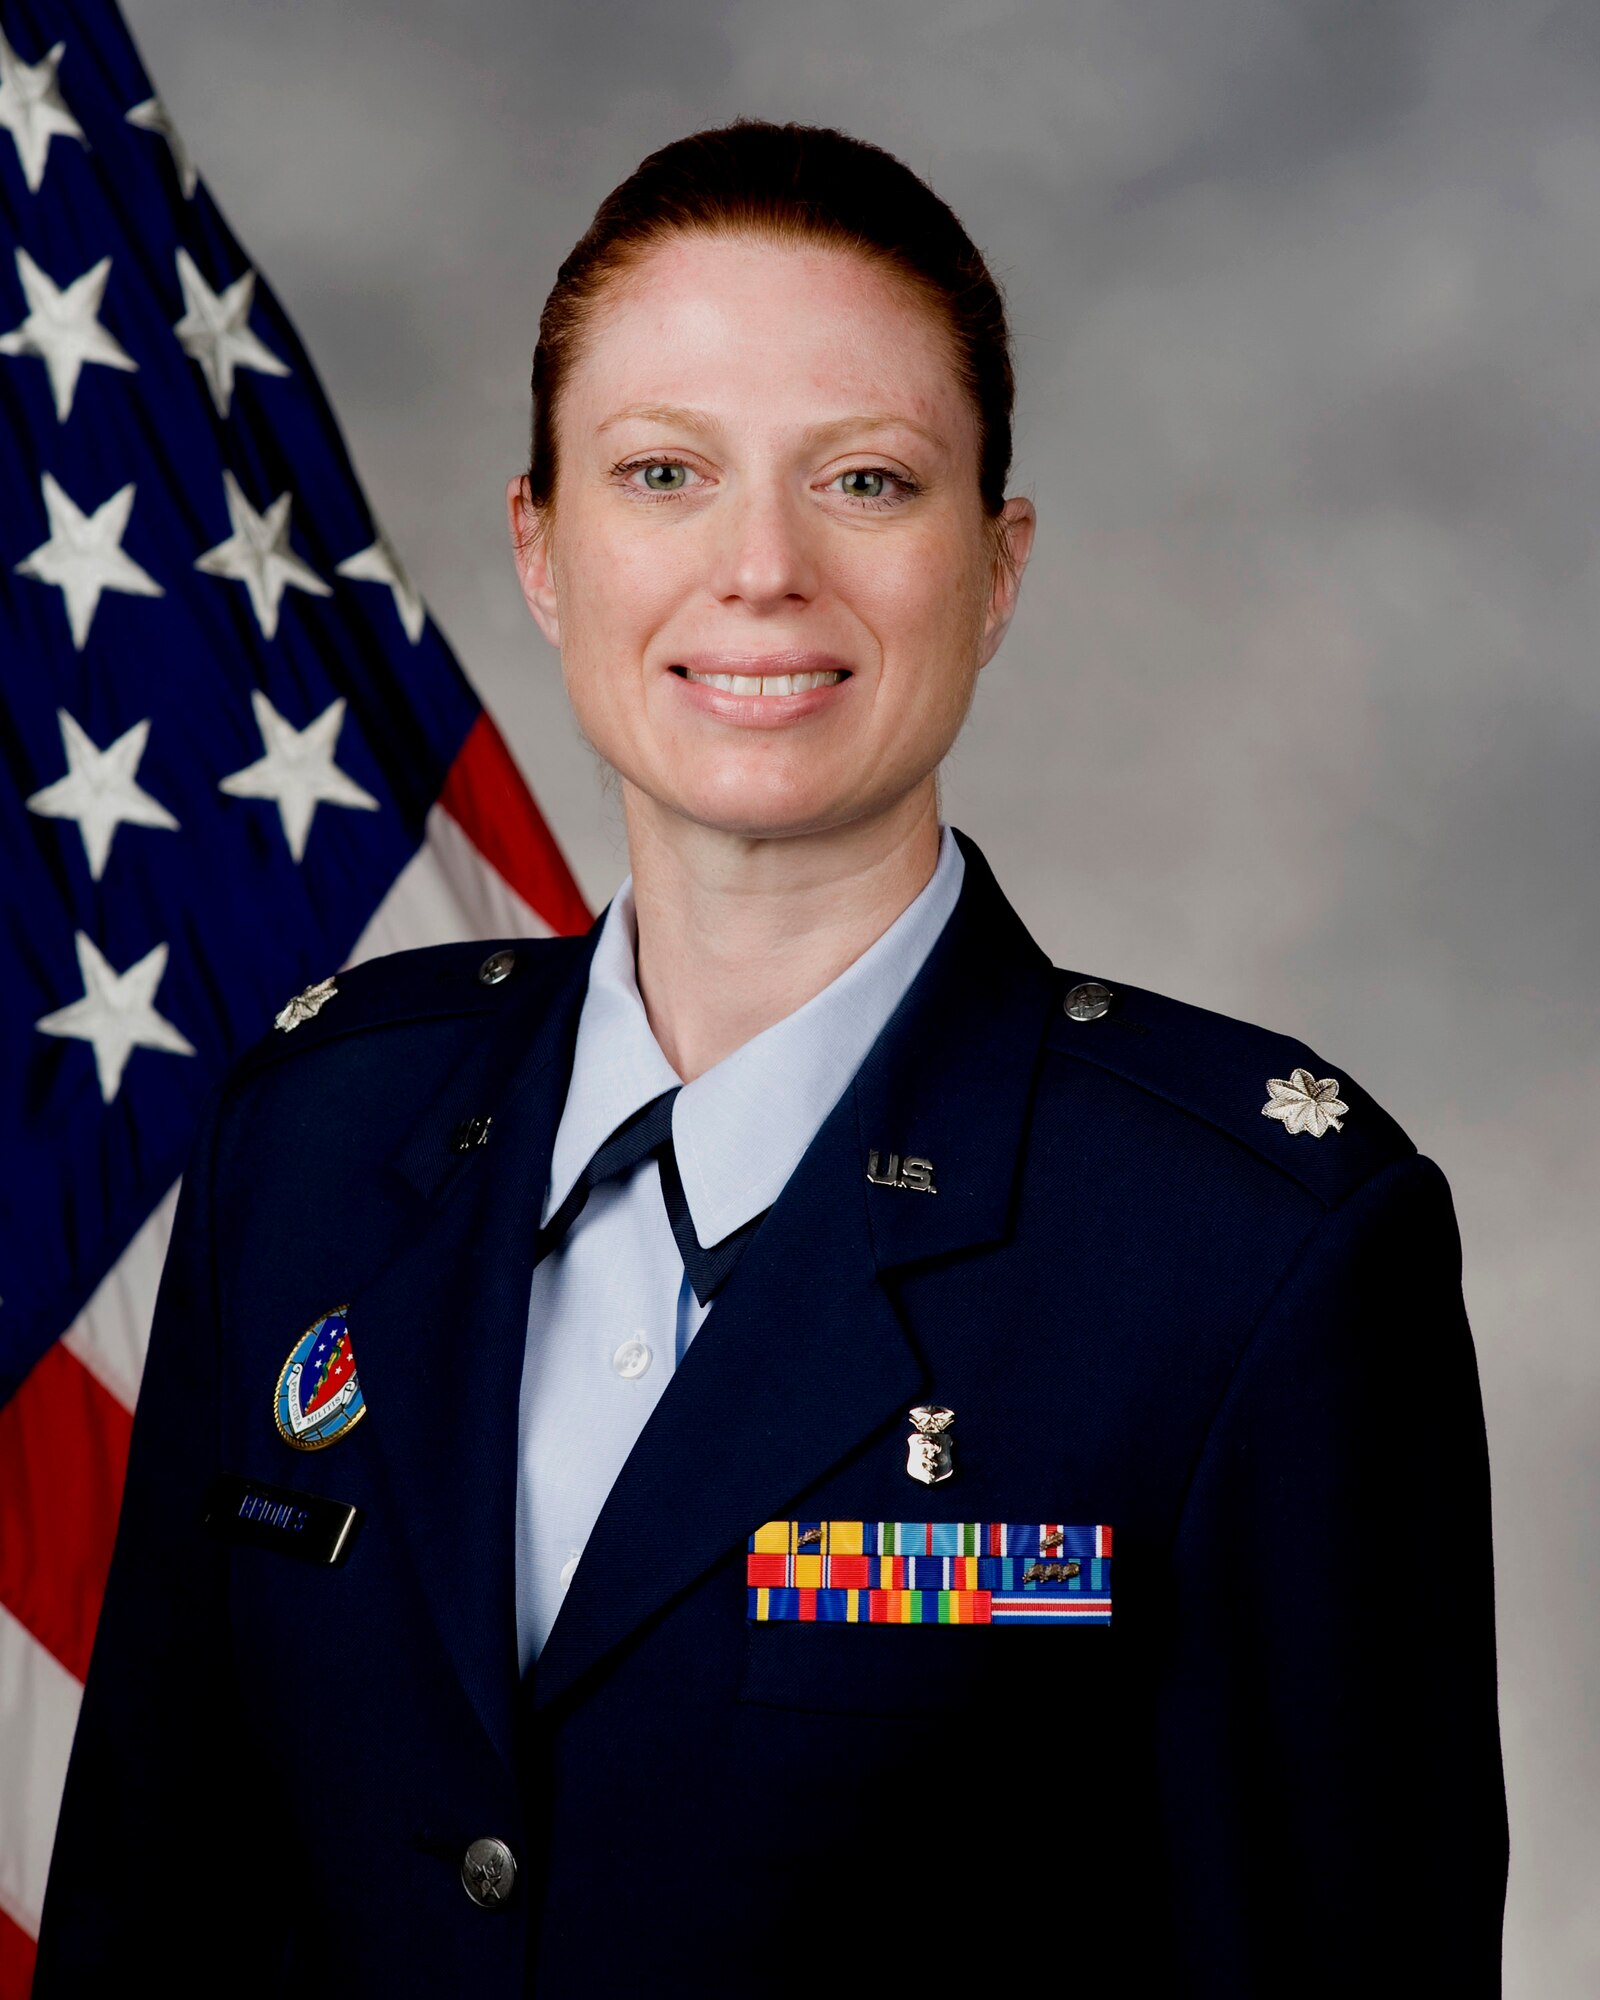 U.S. Air Force Lt. Col. Alice Briones, Armed Forces Medical Examiner System deputy director, has been named director of AFMES, effective February 21, 2020, making Briones the first female director. U.S. Army Lt. Gen. Ronald Place, Defense Health Agency director, selected Briones after she served as deputy director of AFMES since April 2017. (U.S. Air Force photo)